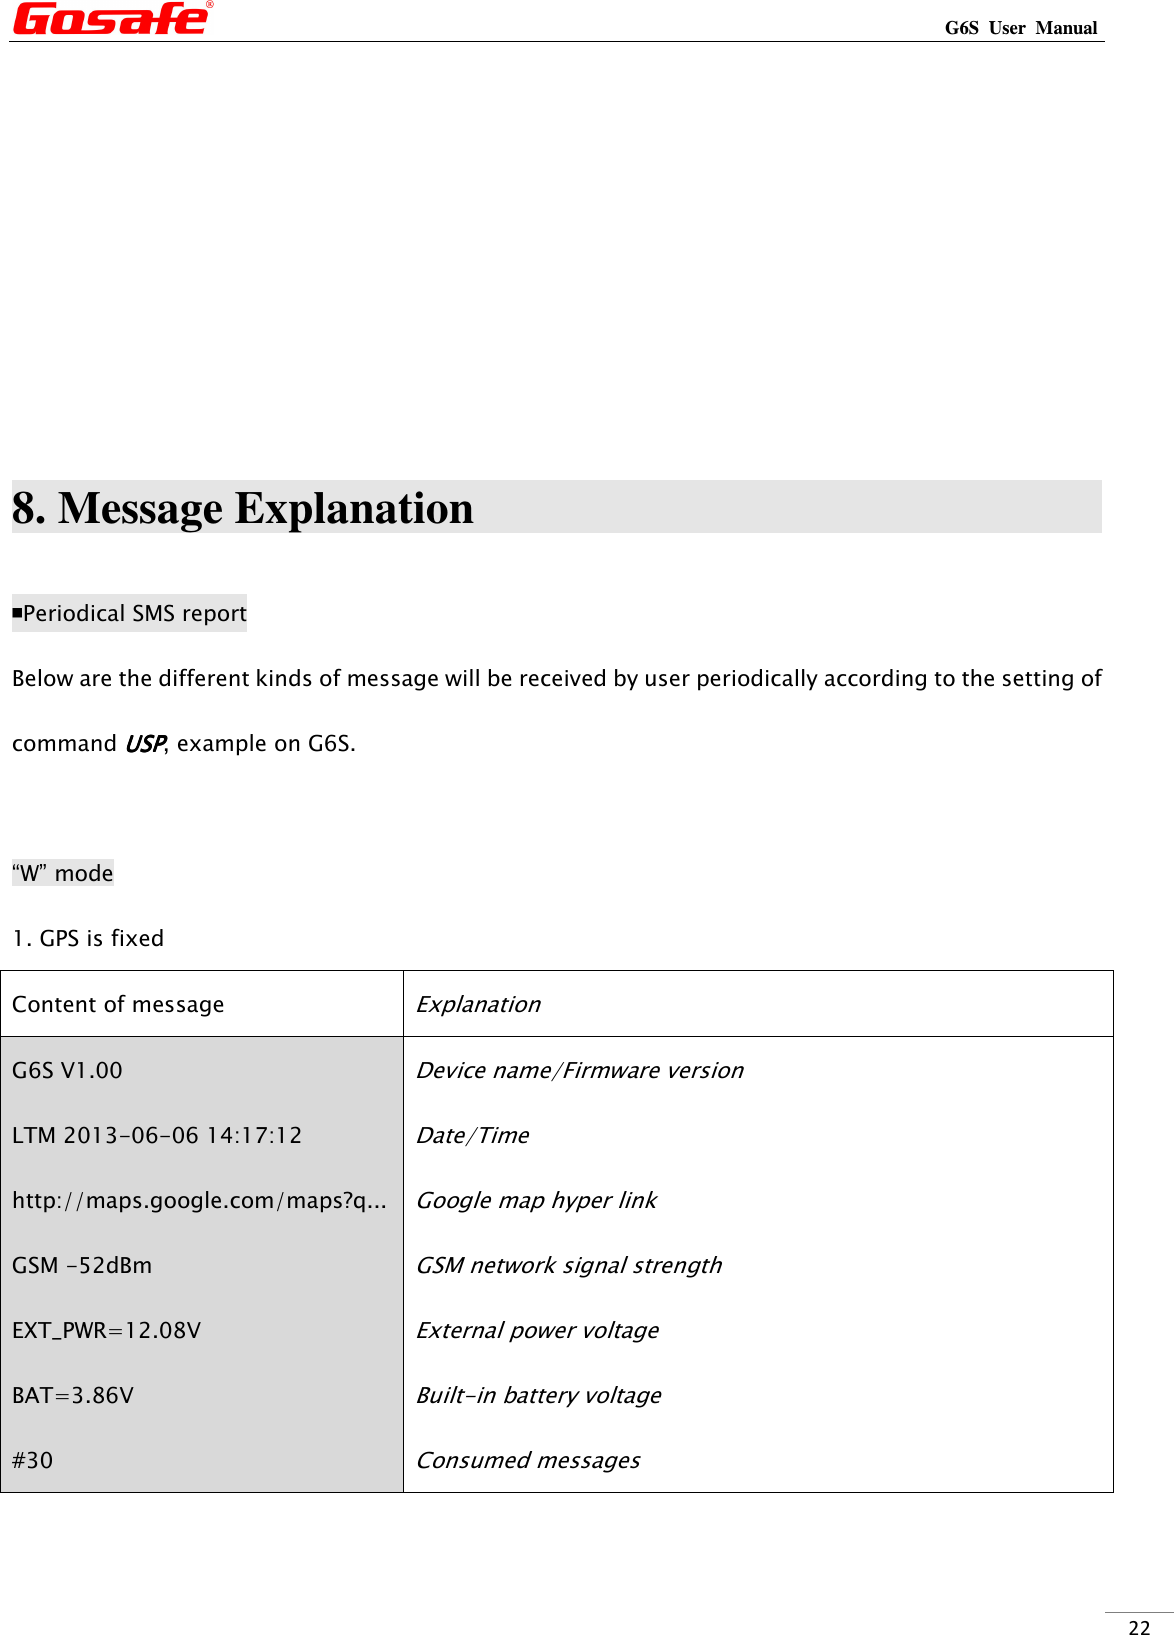                                                                                                                                                             G6S  User  Manual  22       8. Message Explanation                              ￭Periodical SMS report Below are the different kinds of message will be received by user periodically according to the setting of command USPUSPUSPUSP, example on G6S.  “W” mode 1. GPS is fixed Content of message Explanation G6S V1.00 LTM 2013-06-06 14:17:12 http://maps.google.com/maps?q... GSM -52dBm EXT_PWR=12.08V BAT=3.86V #30                      Device name/Firmware version Date/Time Google map hyper link GSM network signal strength External power voltage Built-in battery voltage Consumed messages 